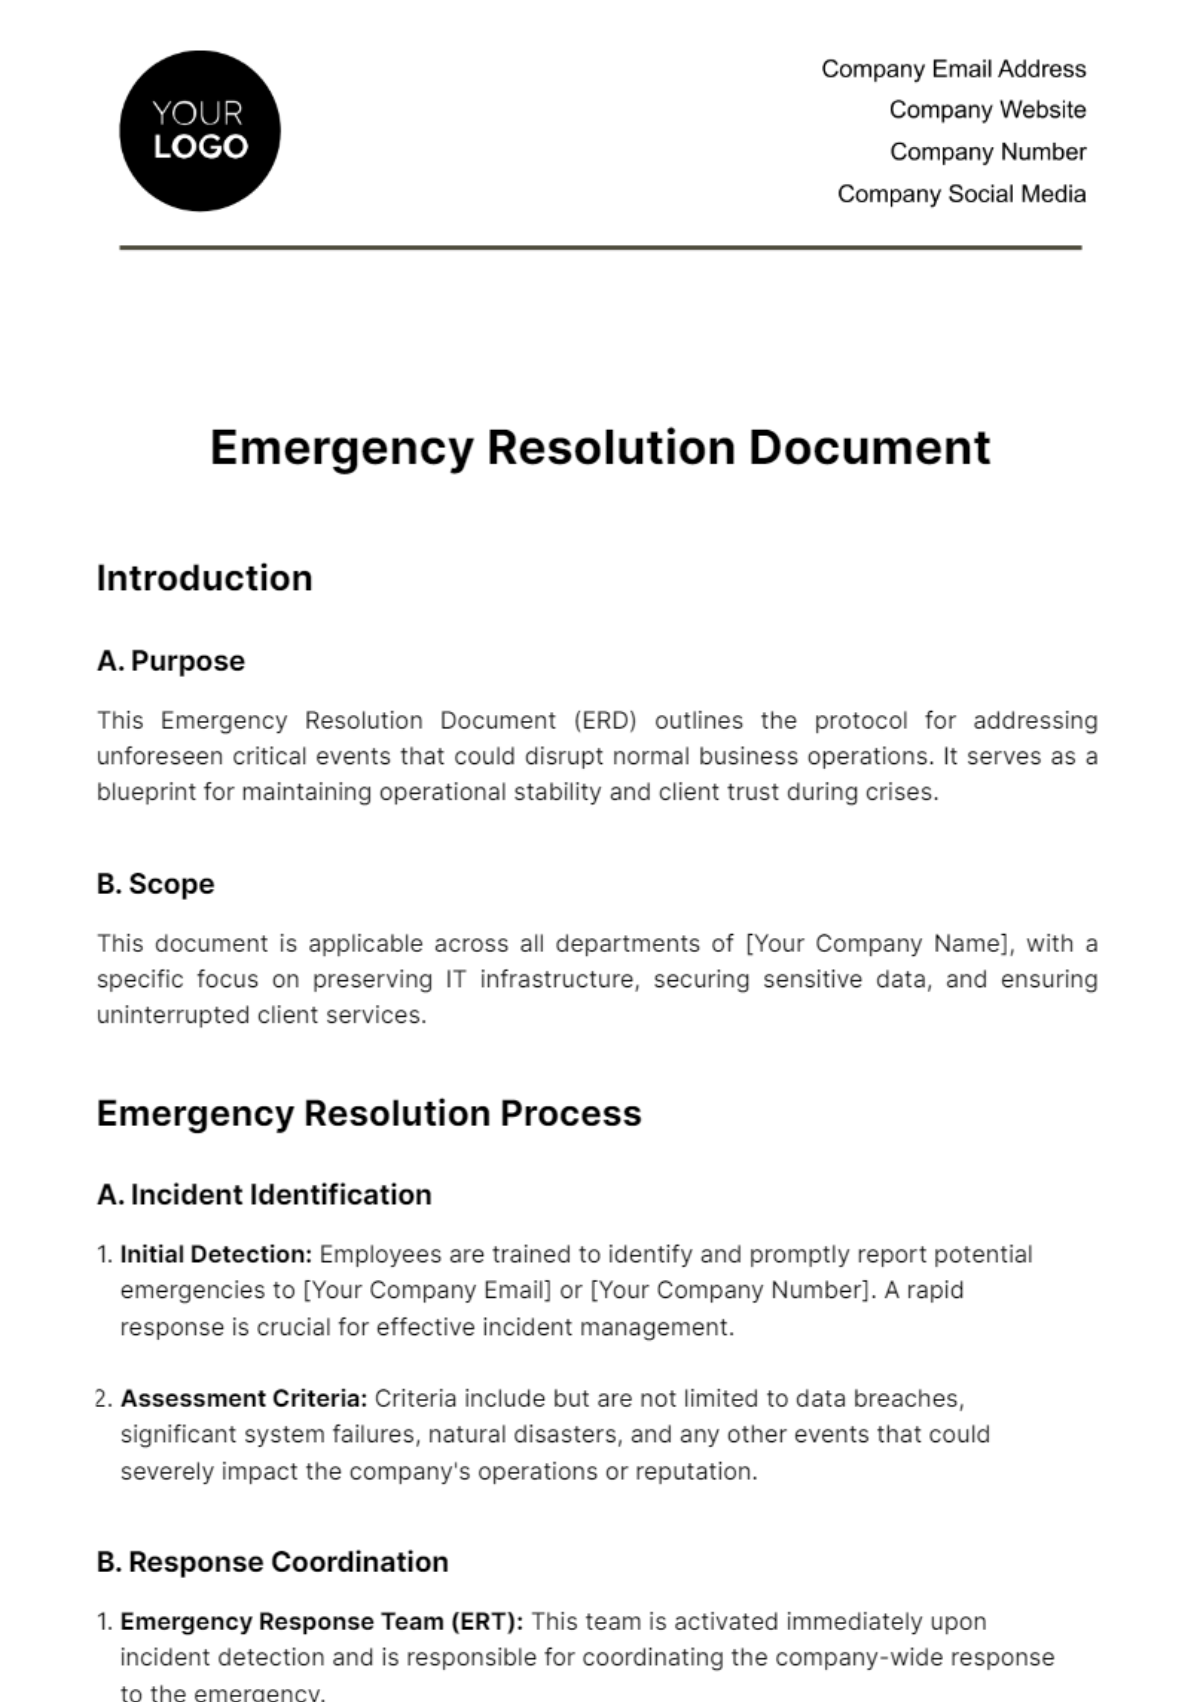 Free Emergency Resolution Document Template